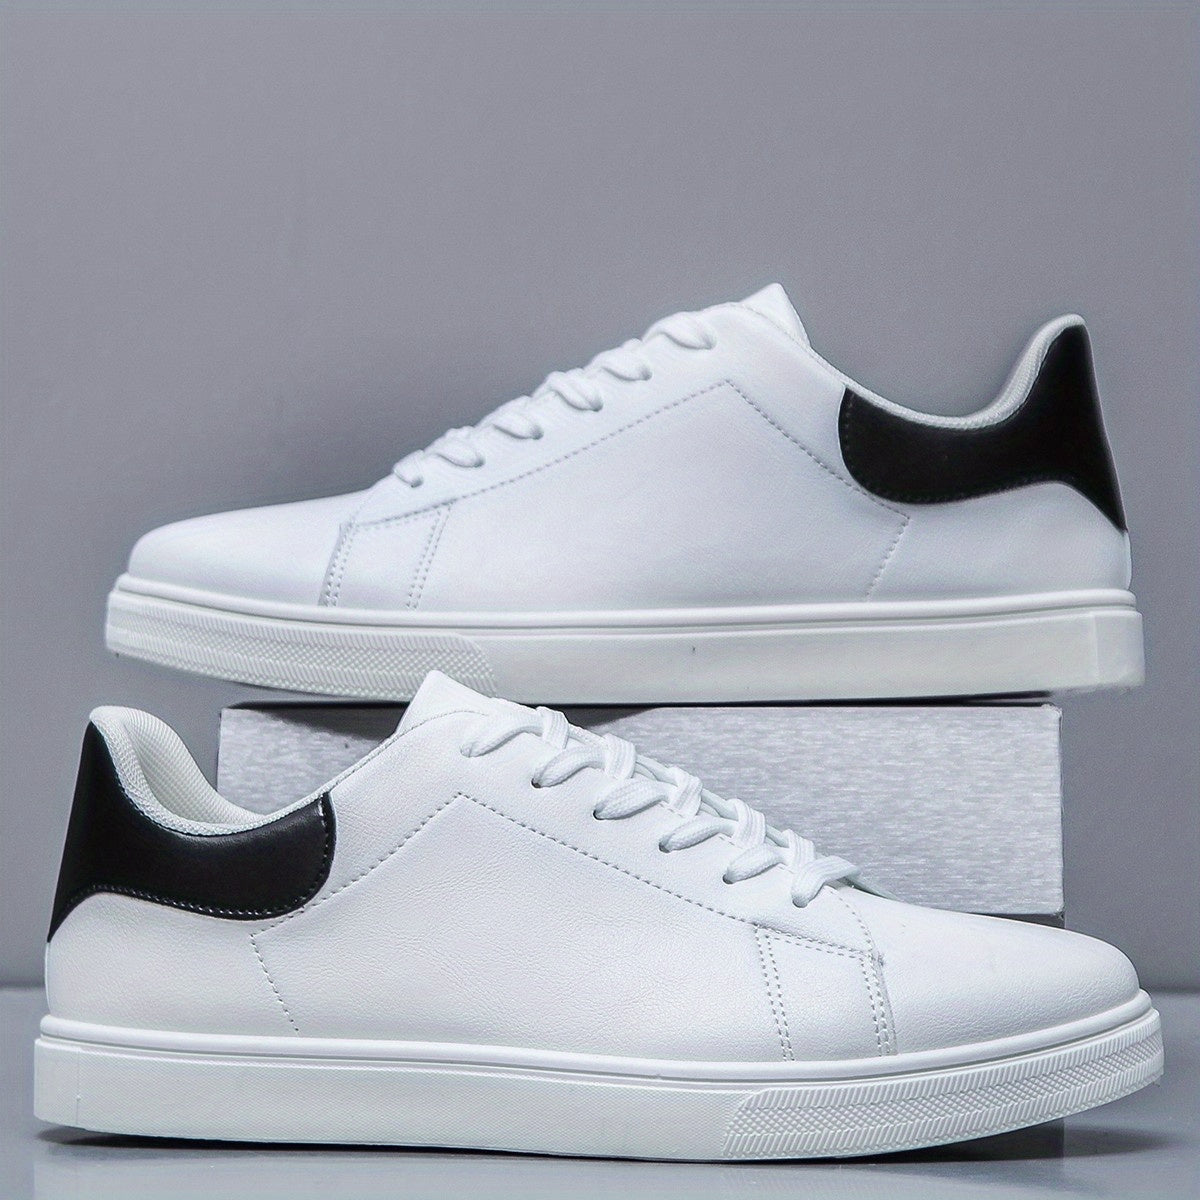 Men's PU Leather Lace-up Skate Sneakers, Breathable